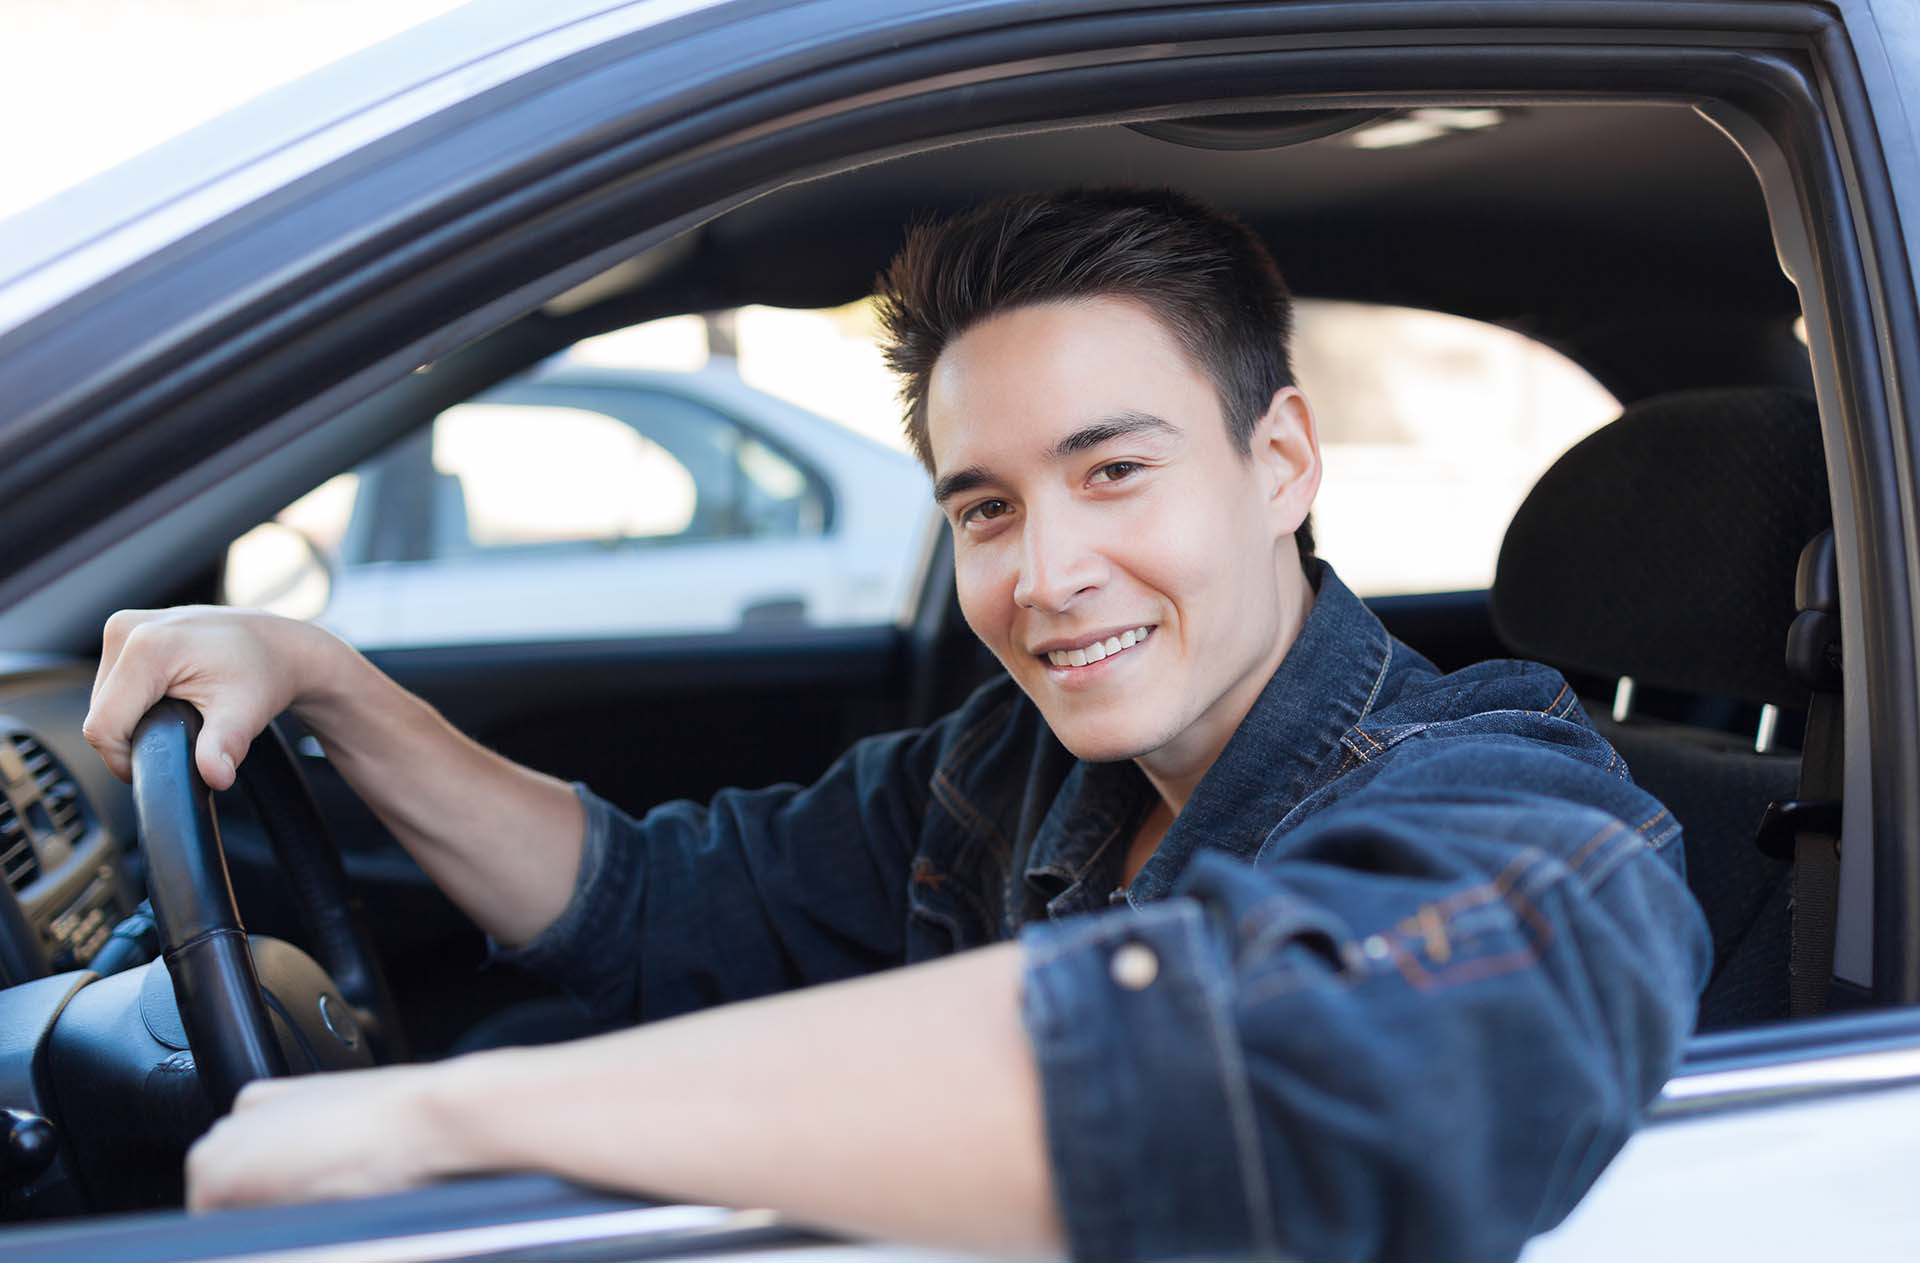 Happy young man sitting in the car